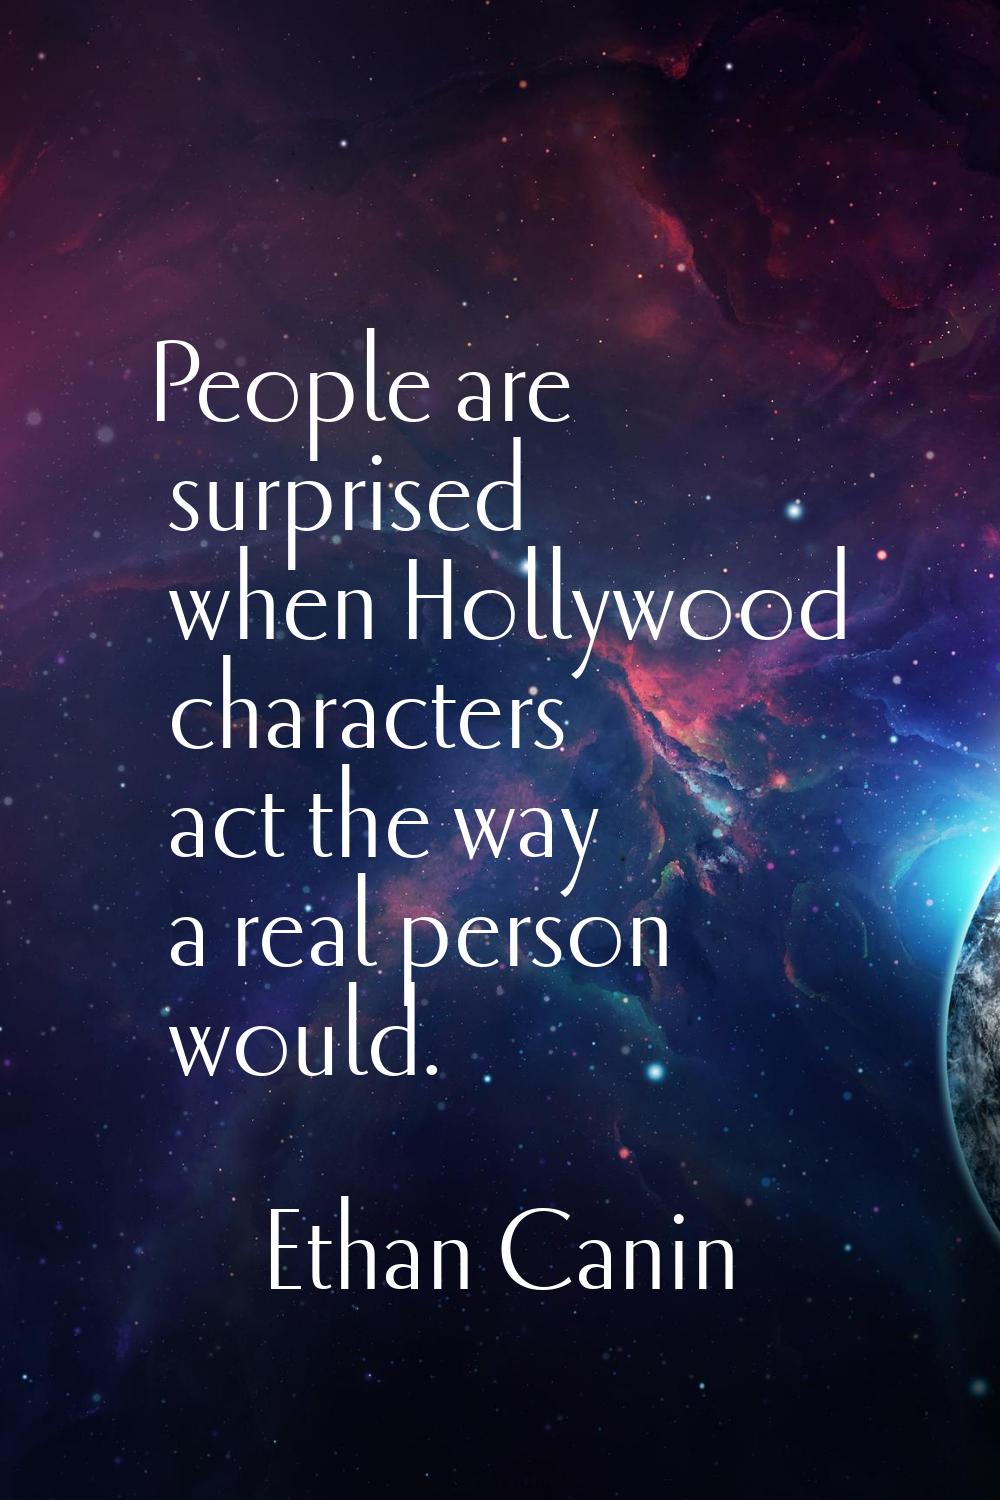 People are surprised when Hollywood characters act the way a real person would.